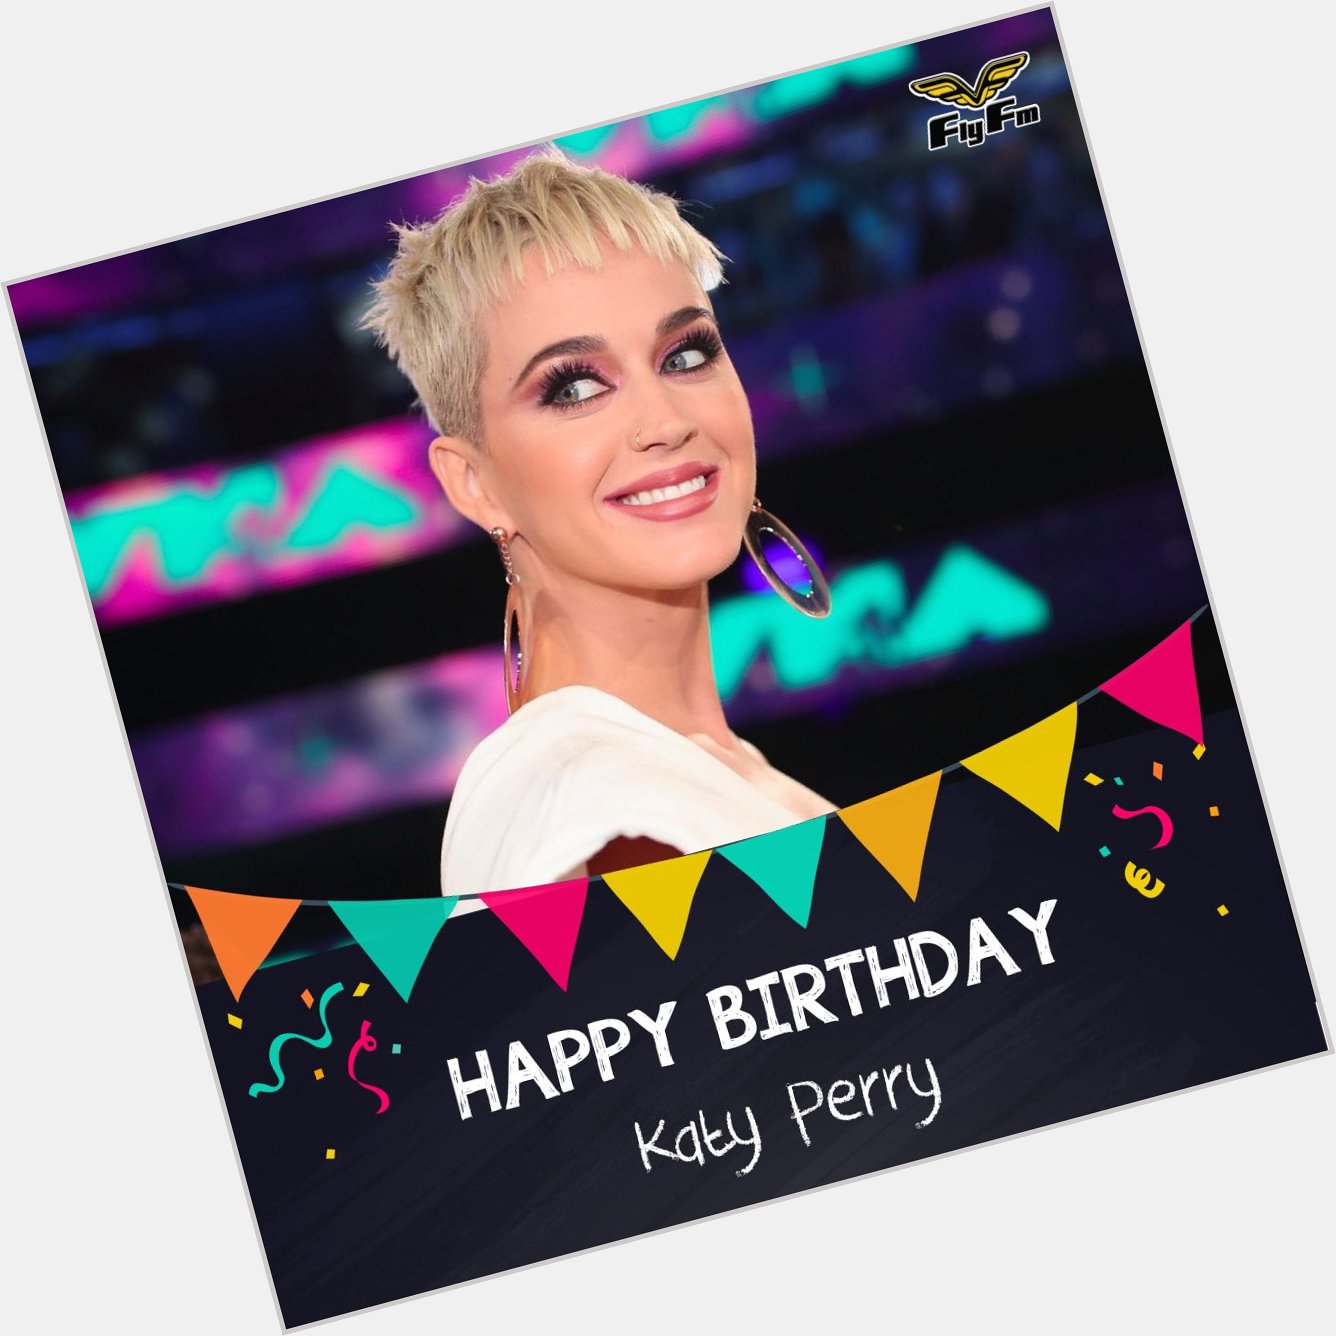 We re chained to the rhythm for Katy Perry s birthday! HAPPY 33rd BIRTHDAY KATY! 